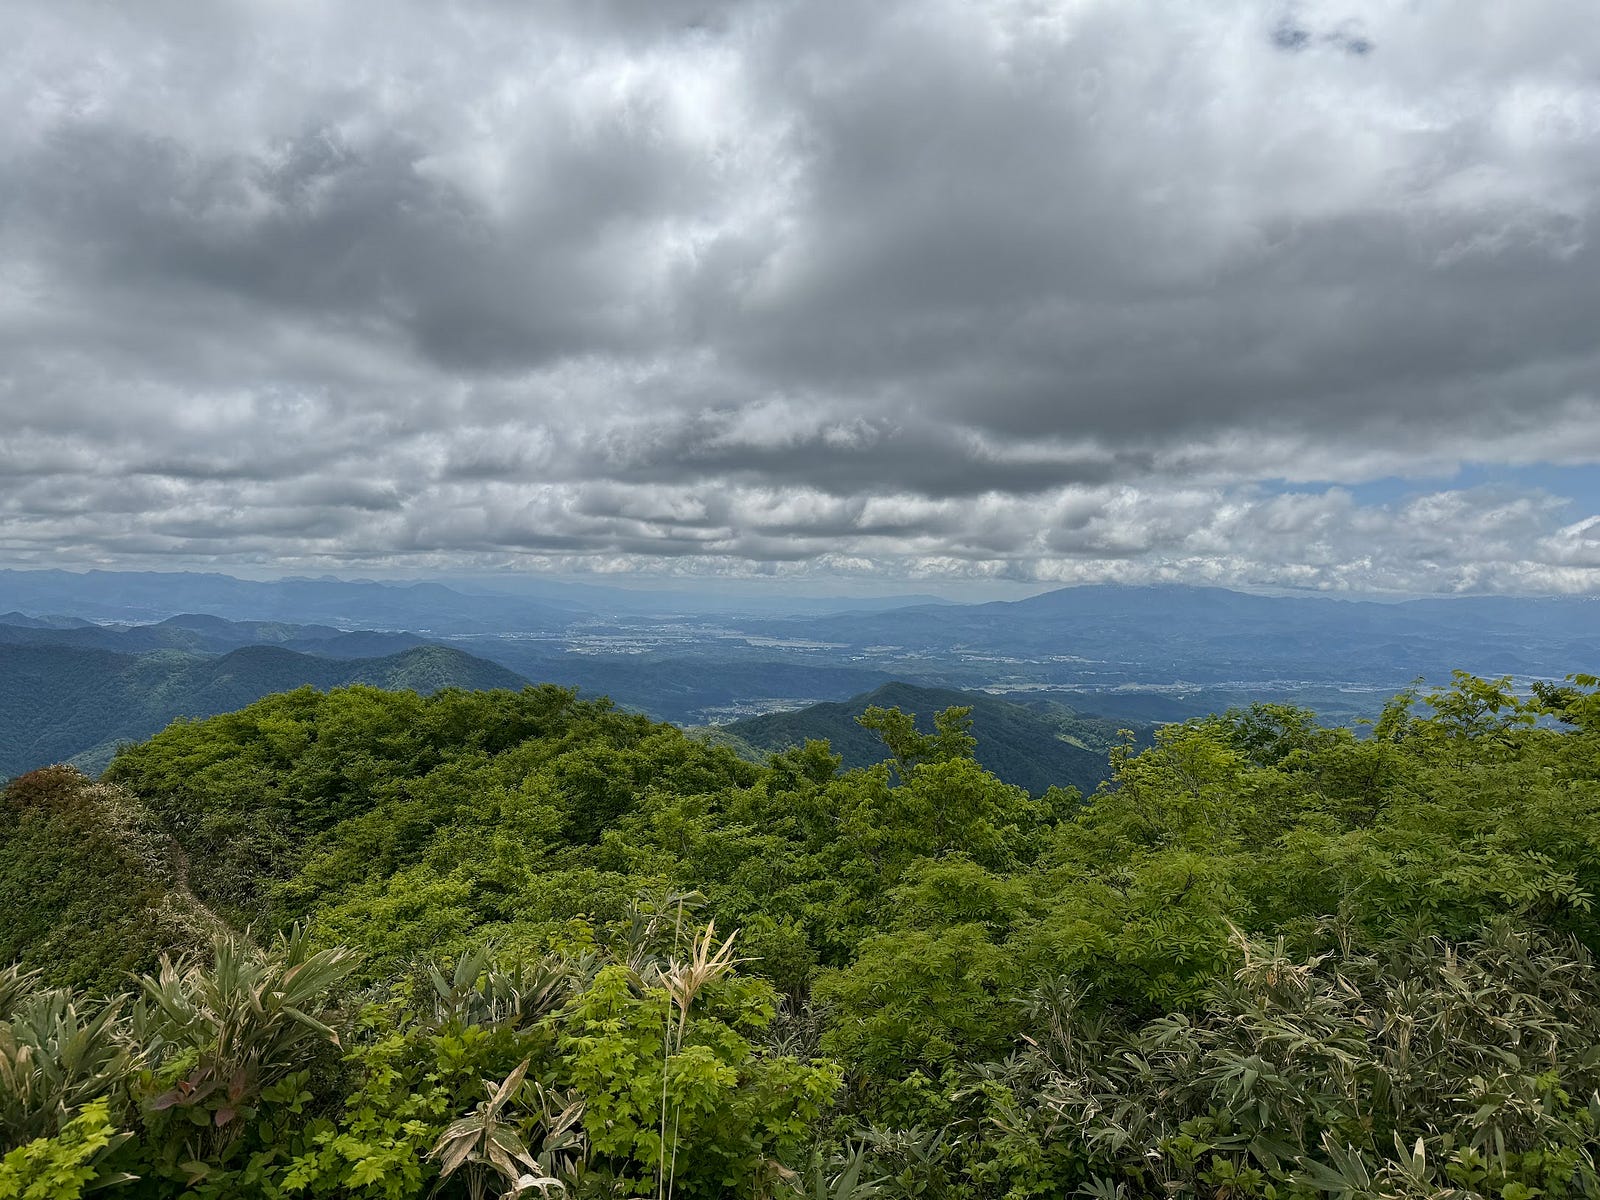 Looking back from the summit towards the trails of Mokuzo-yama. The sky is grey with clouds but the bright green of early summer dominates the foreground.